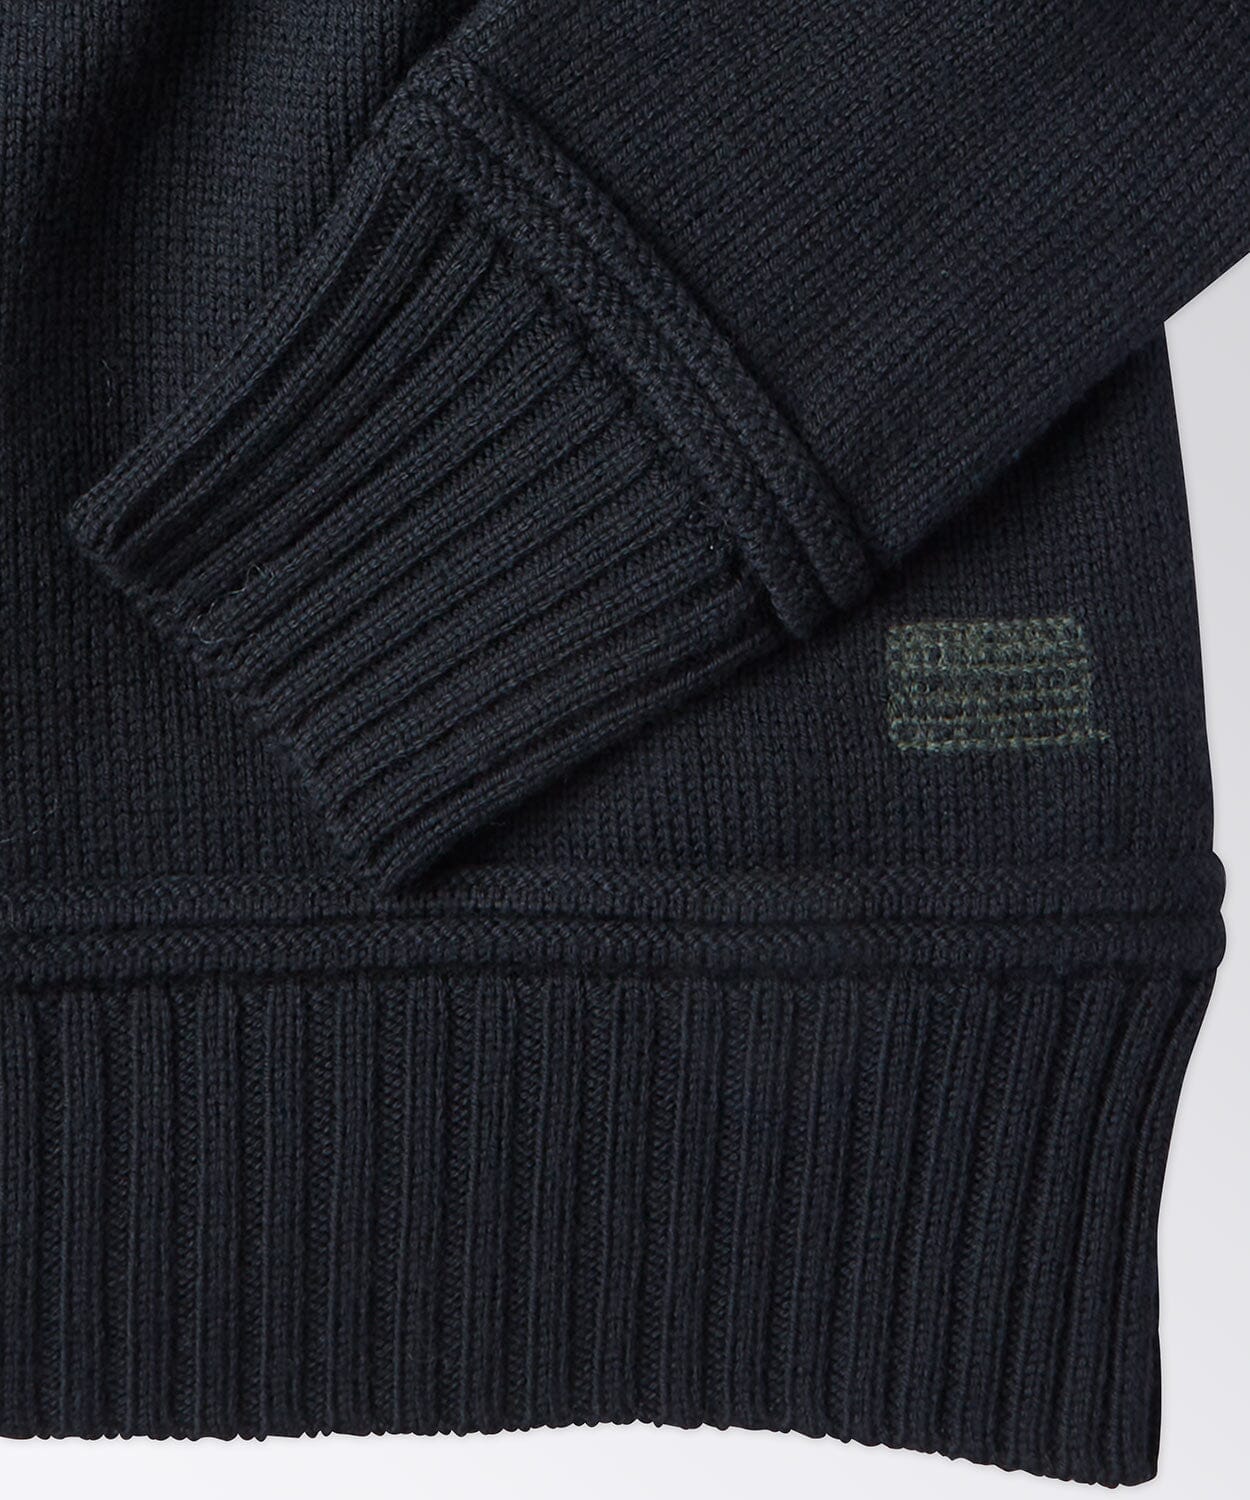 detail of a mens wool sweater